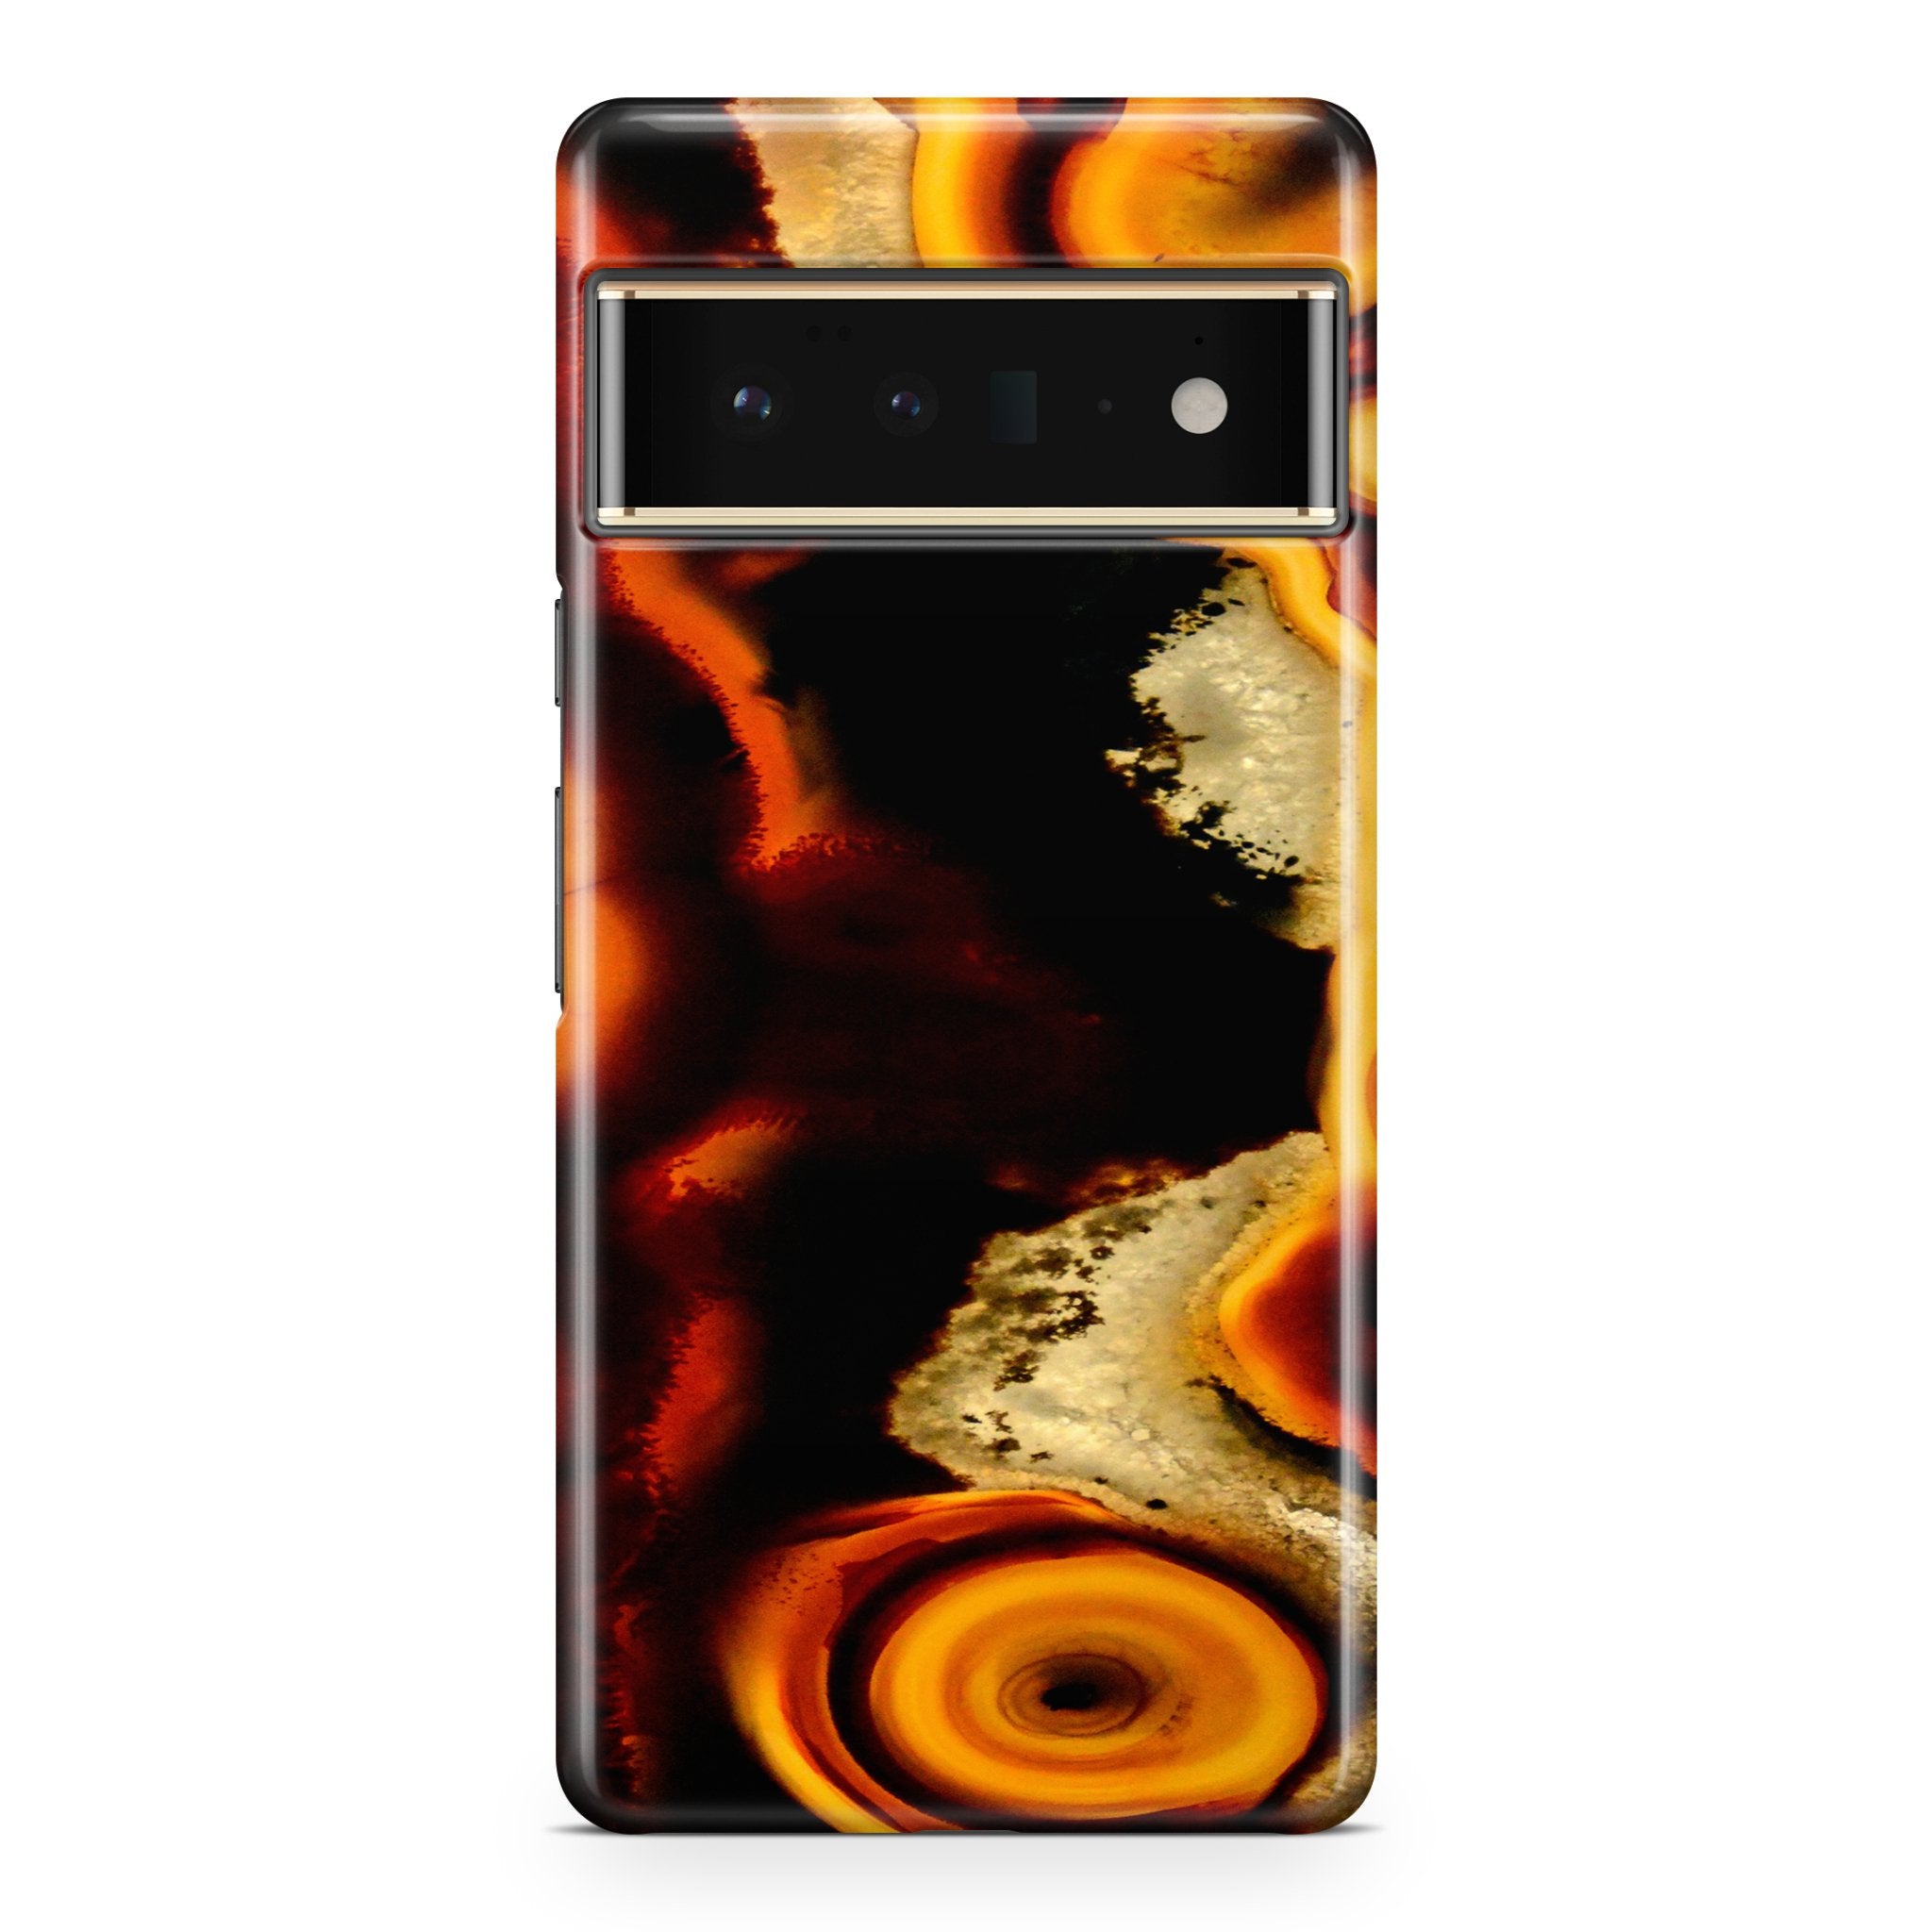 Orange Agate - Google phone case designs by CaseSwagger